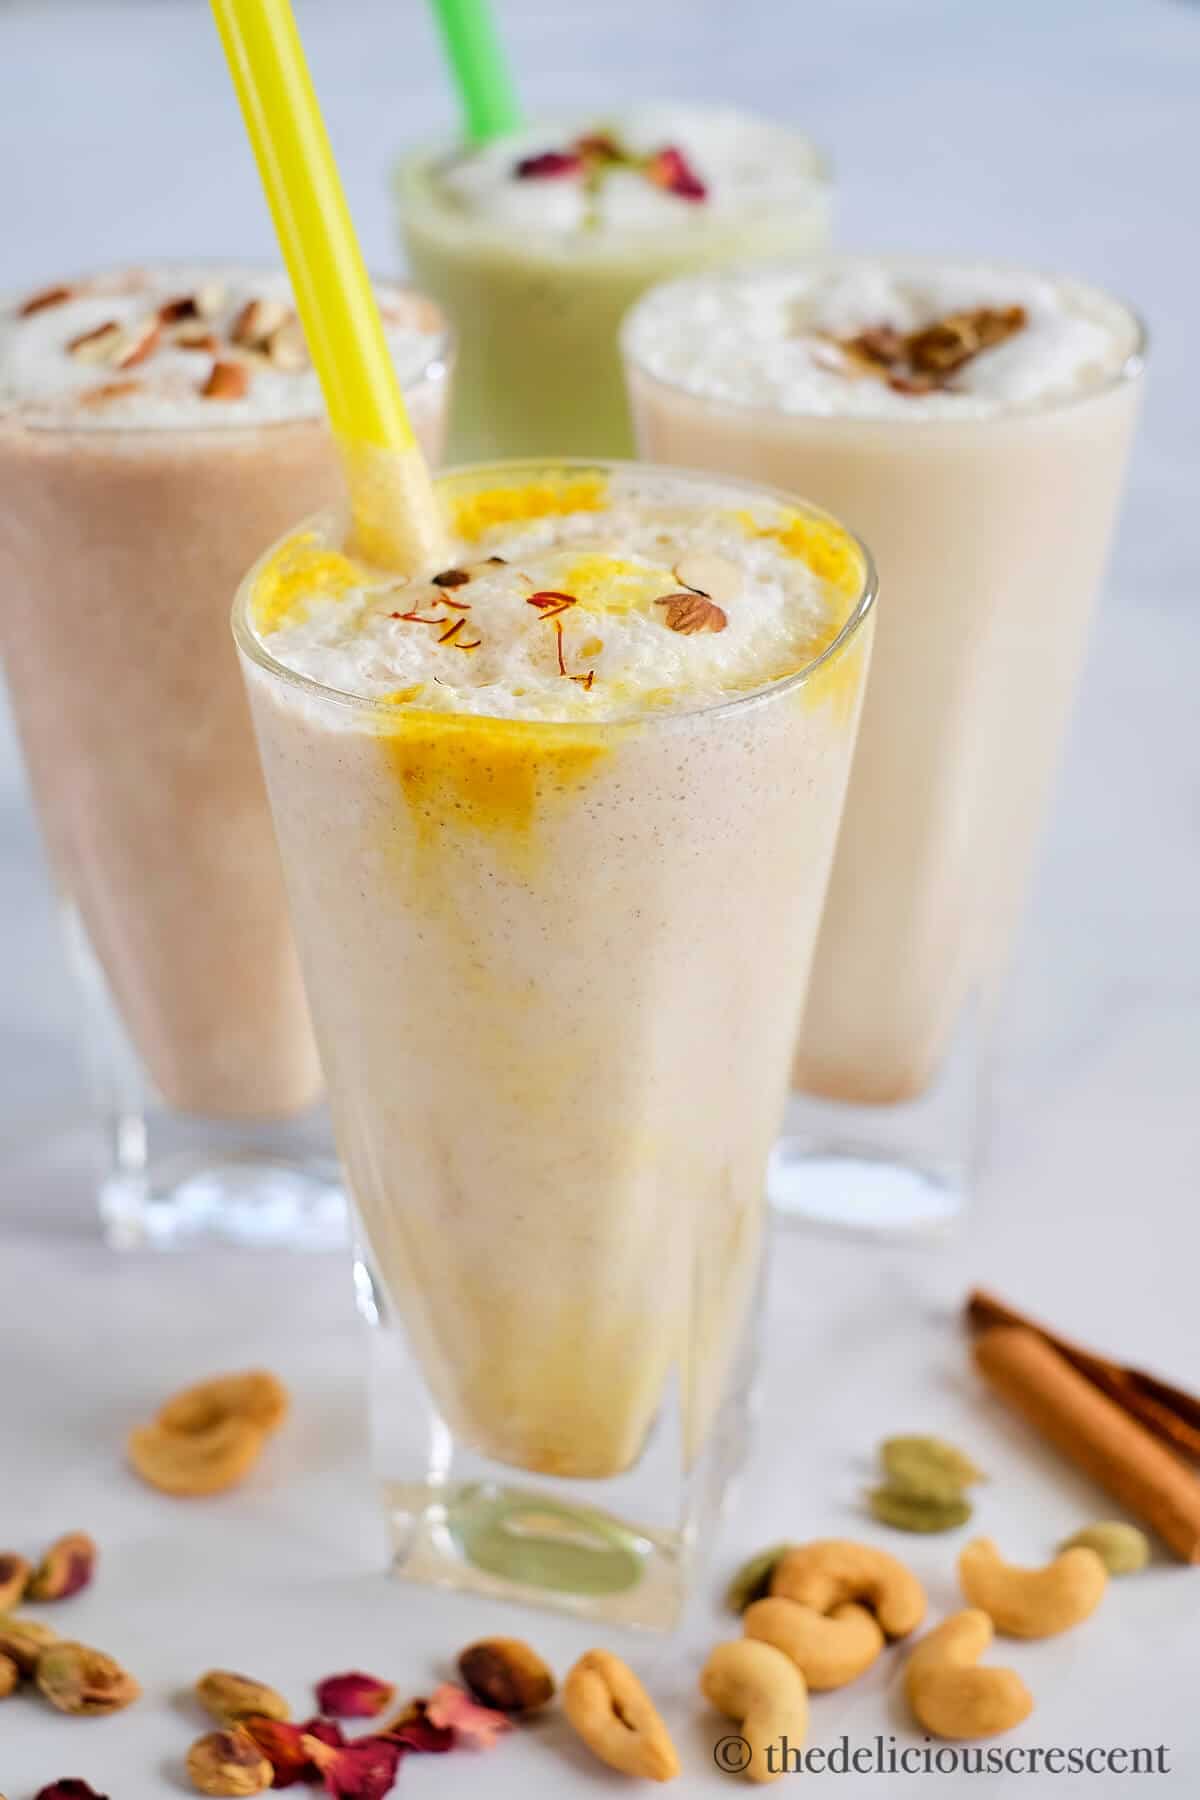 Date shake made with almonds and saffron.